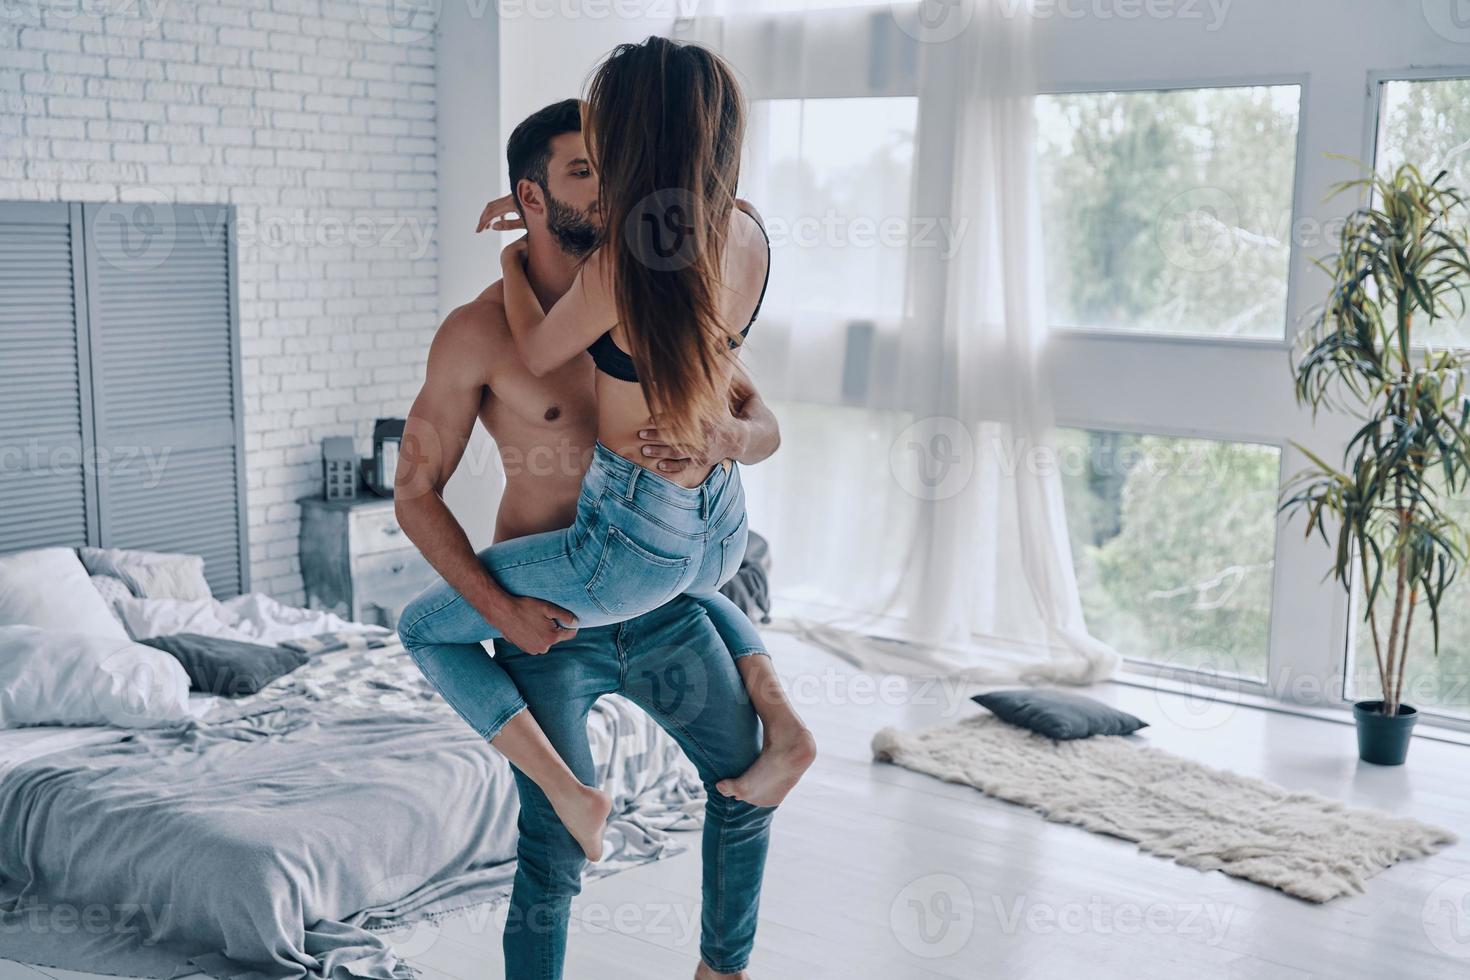 Handsome young shirtless man carrying semi-dressed attractive woman while standing in the bedroom photo